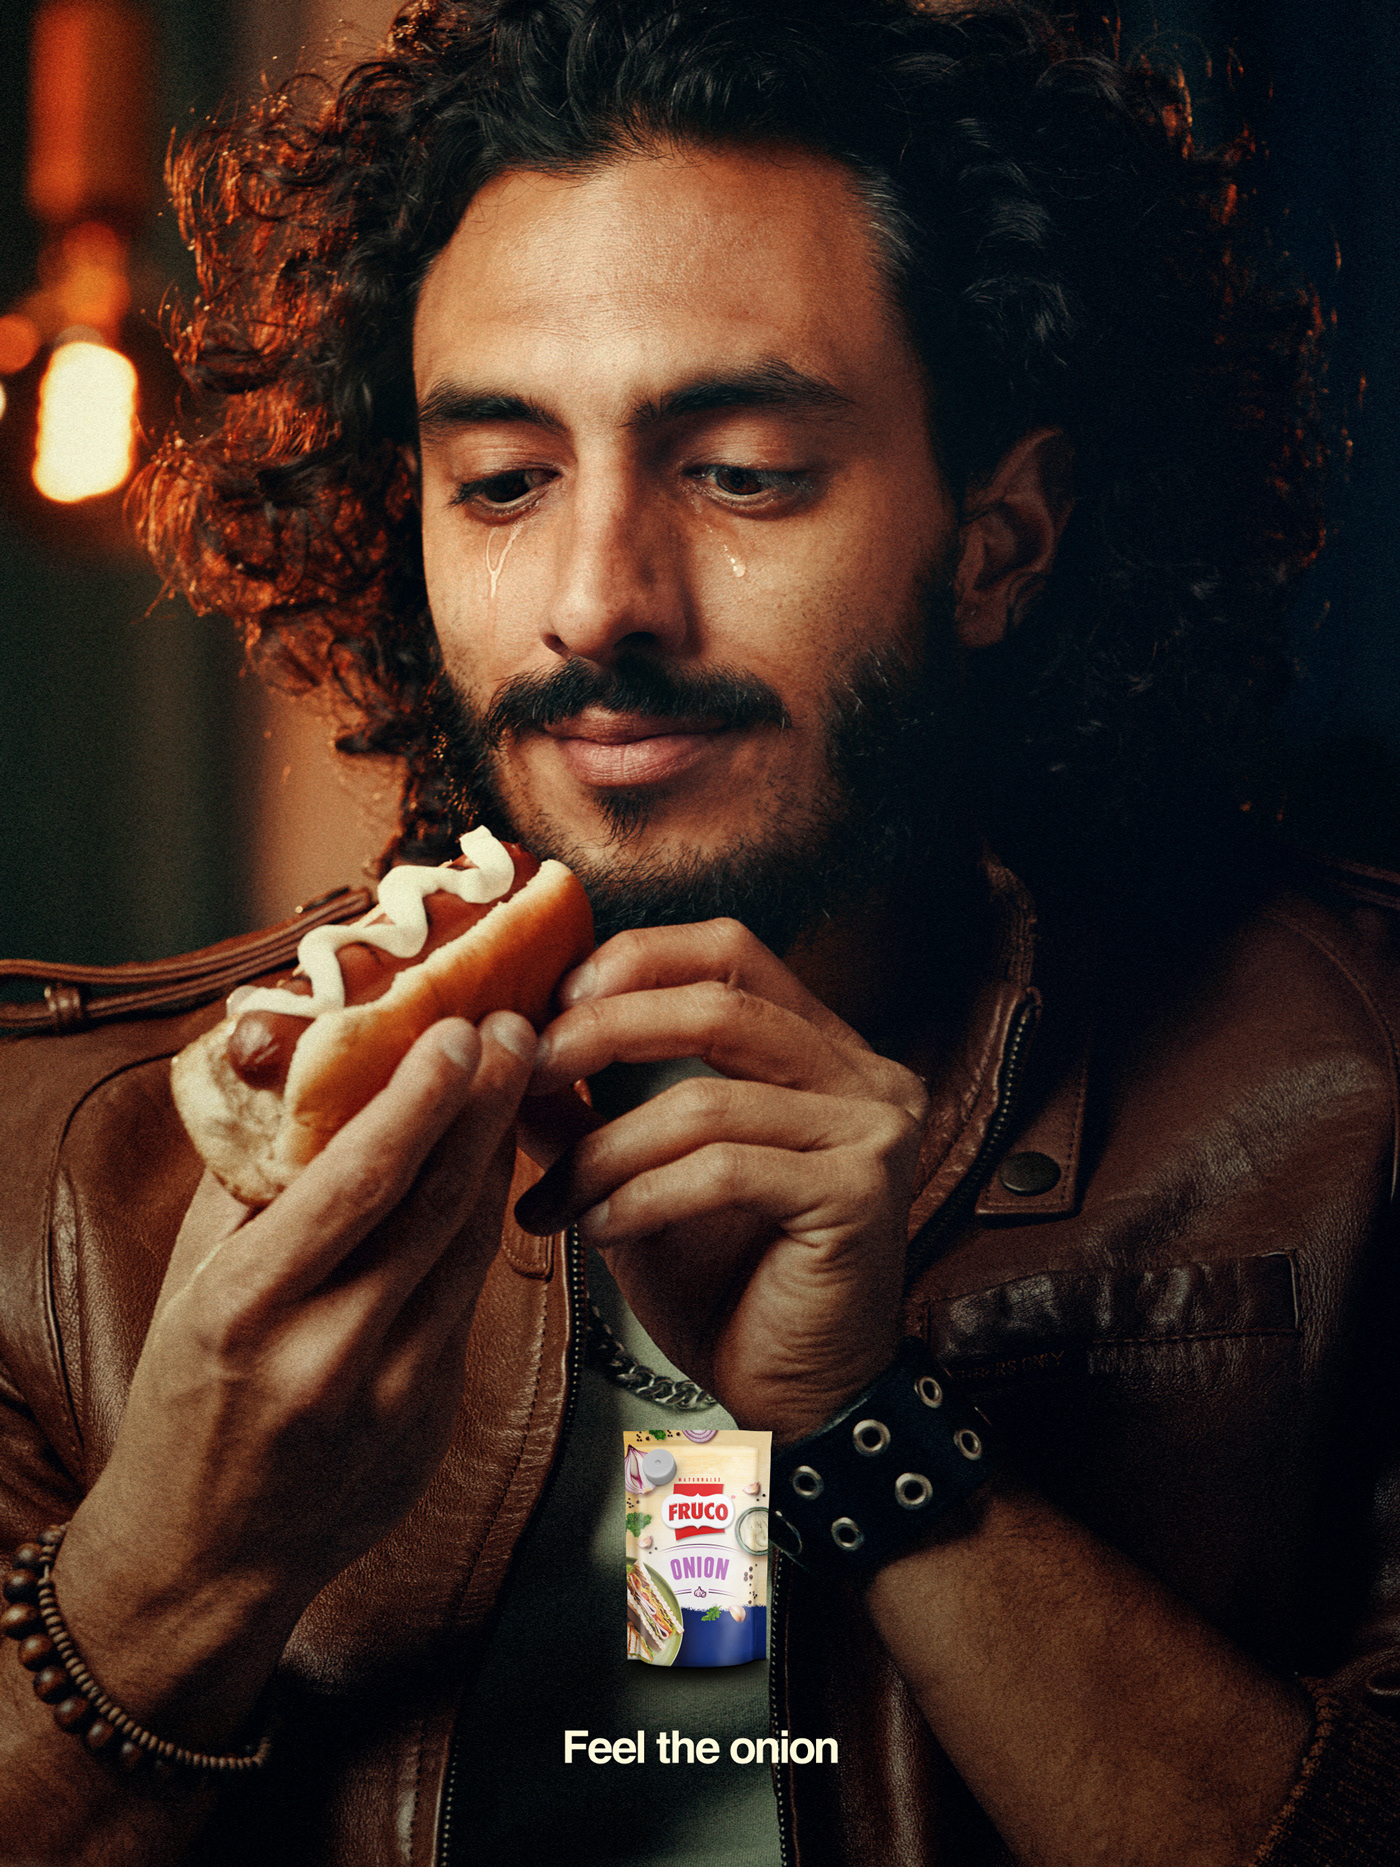 ad Advertising  art direction  Photography  print retouch sauce tears Food  publicidad